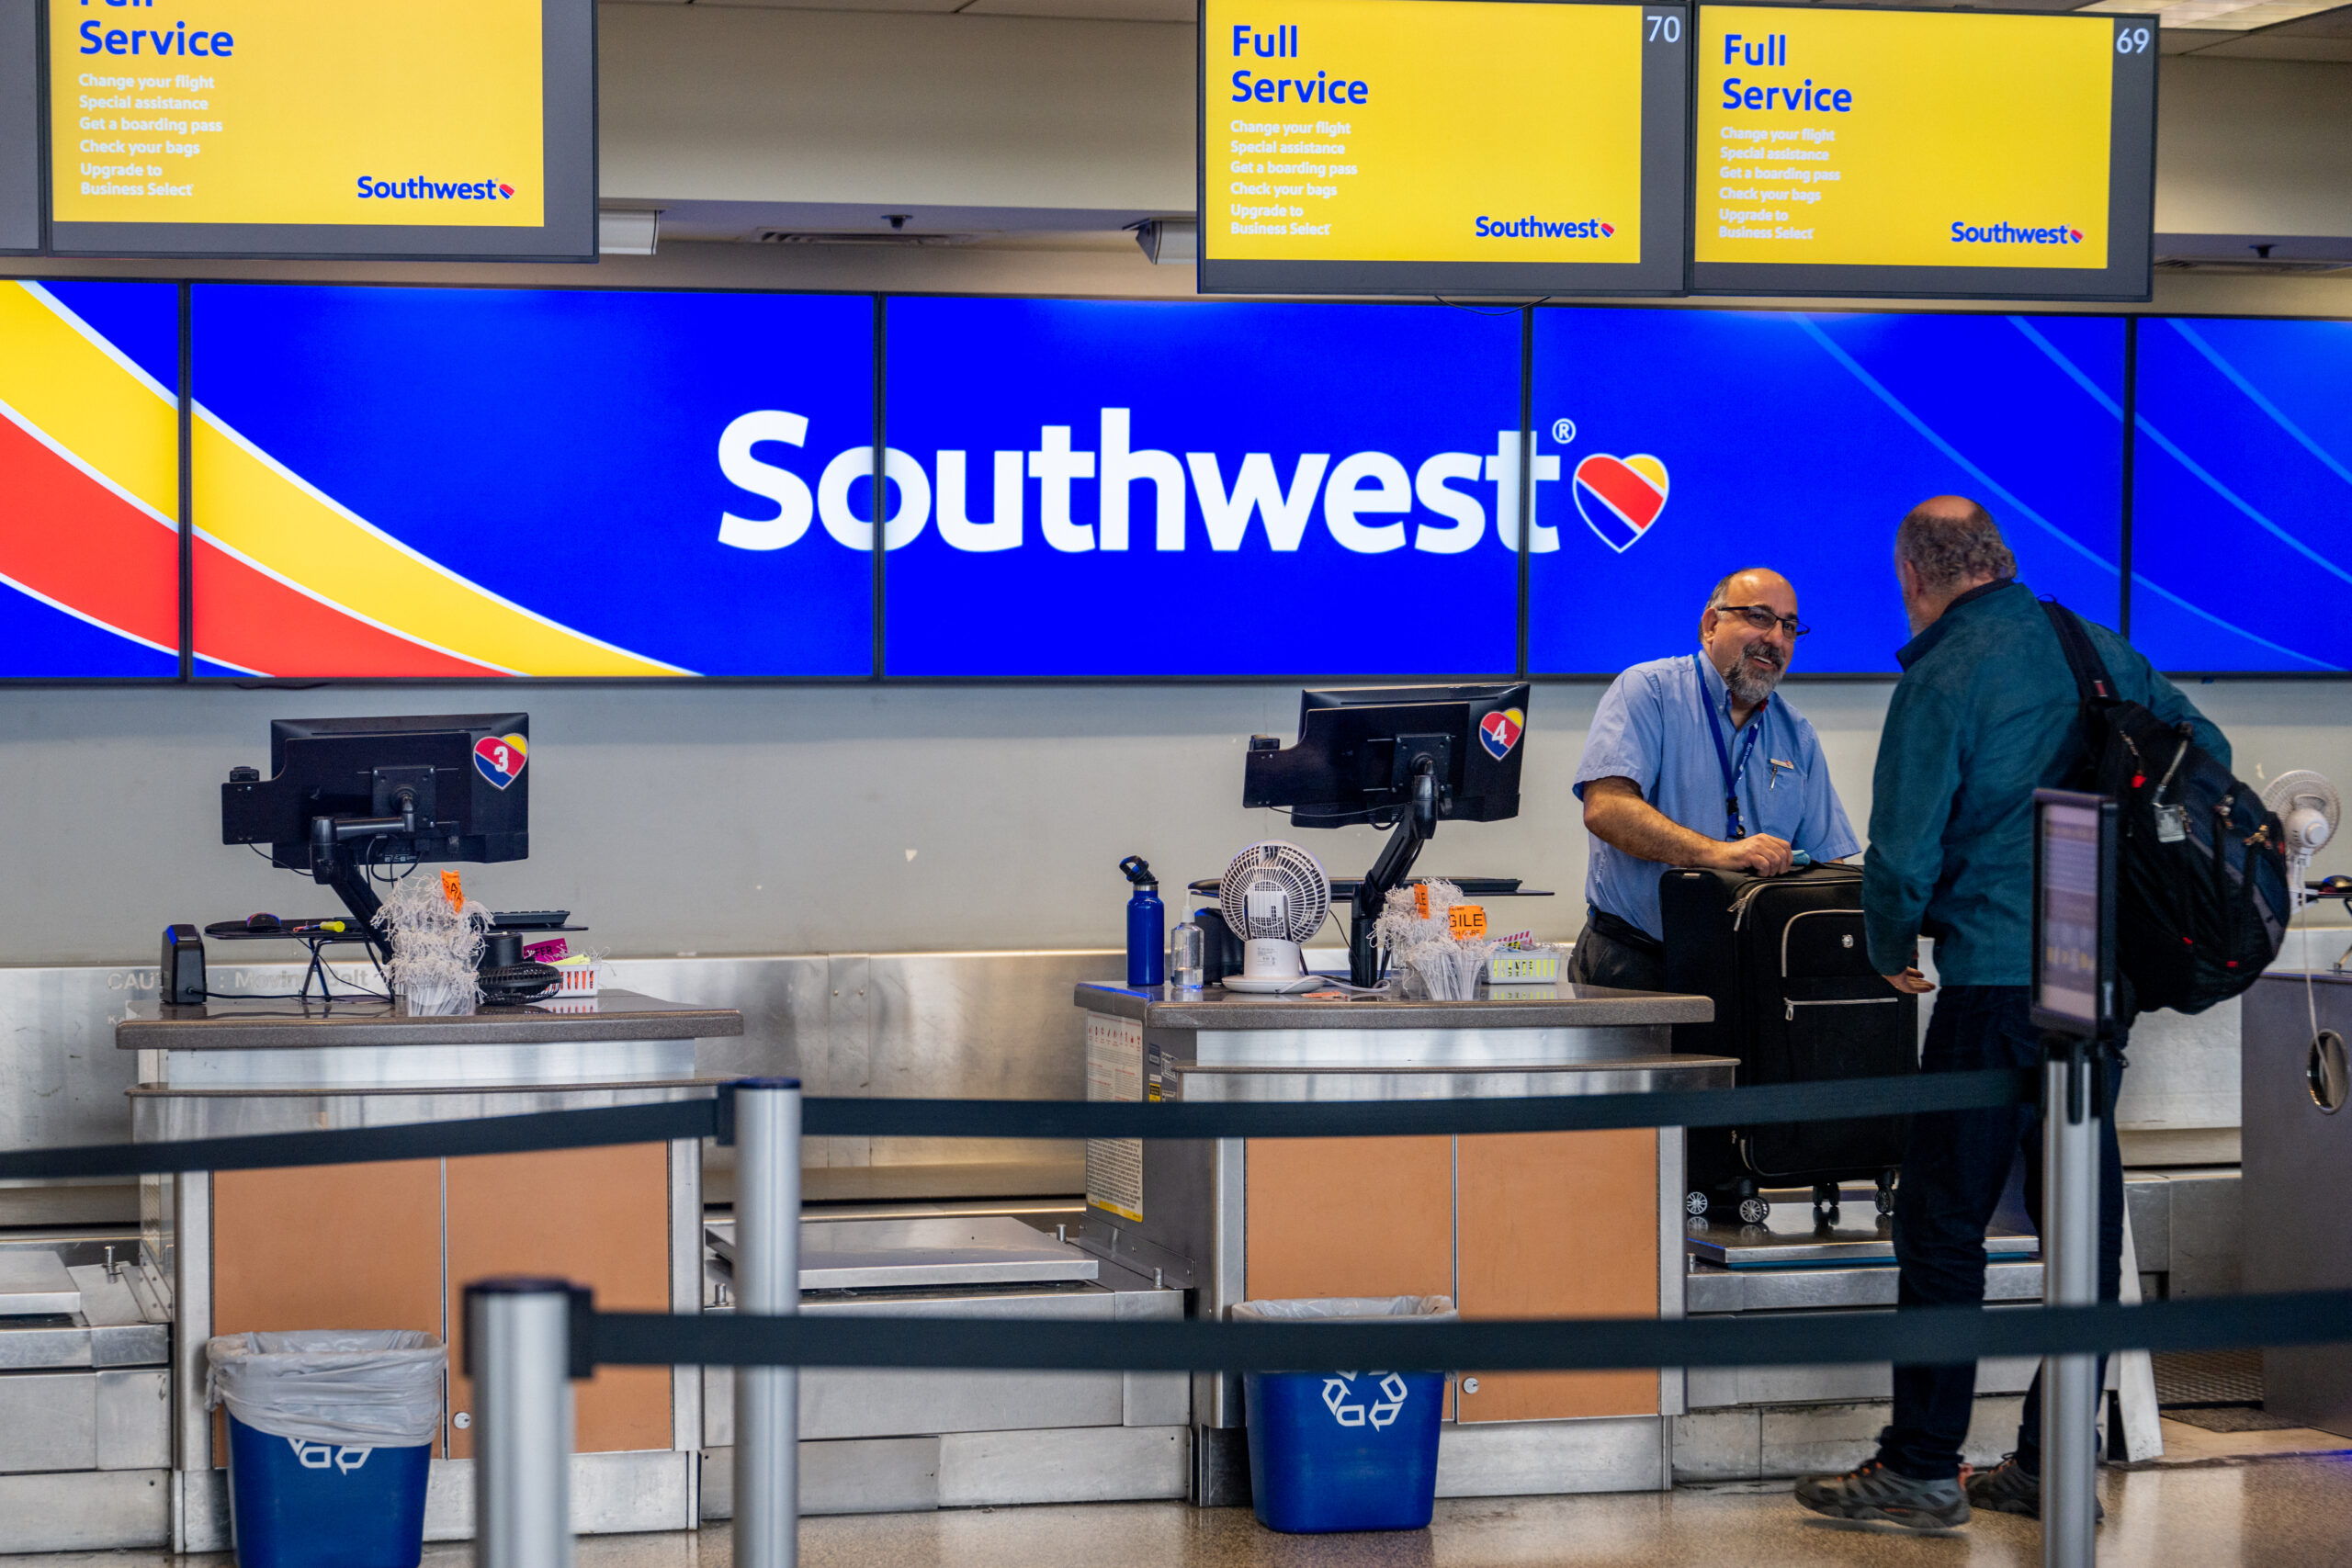 Southwest Airlines comes in at #1 at Tampa International Aiport